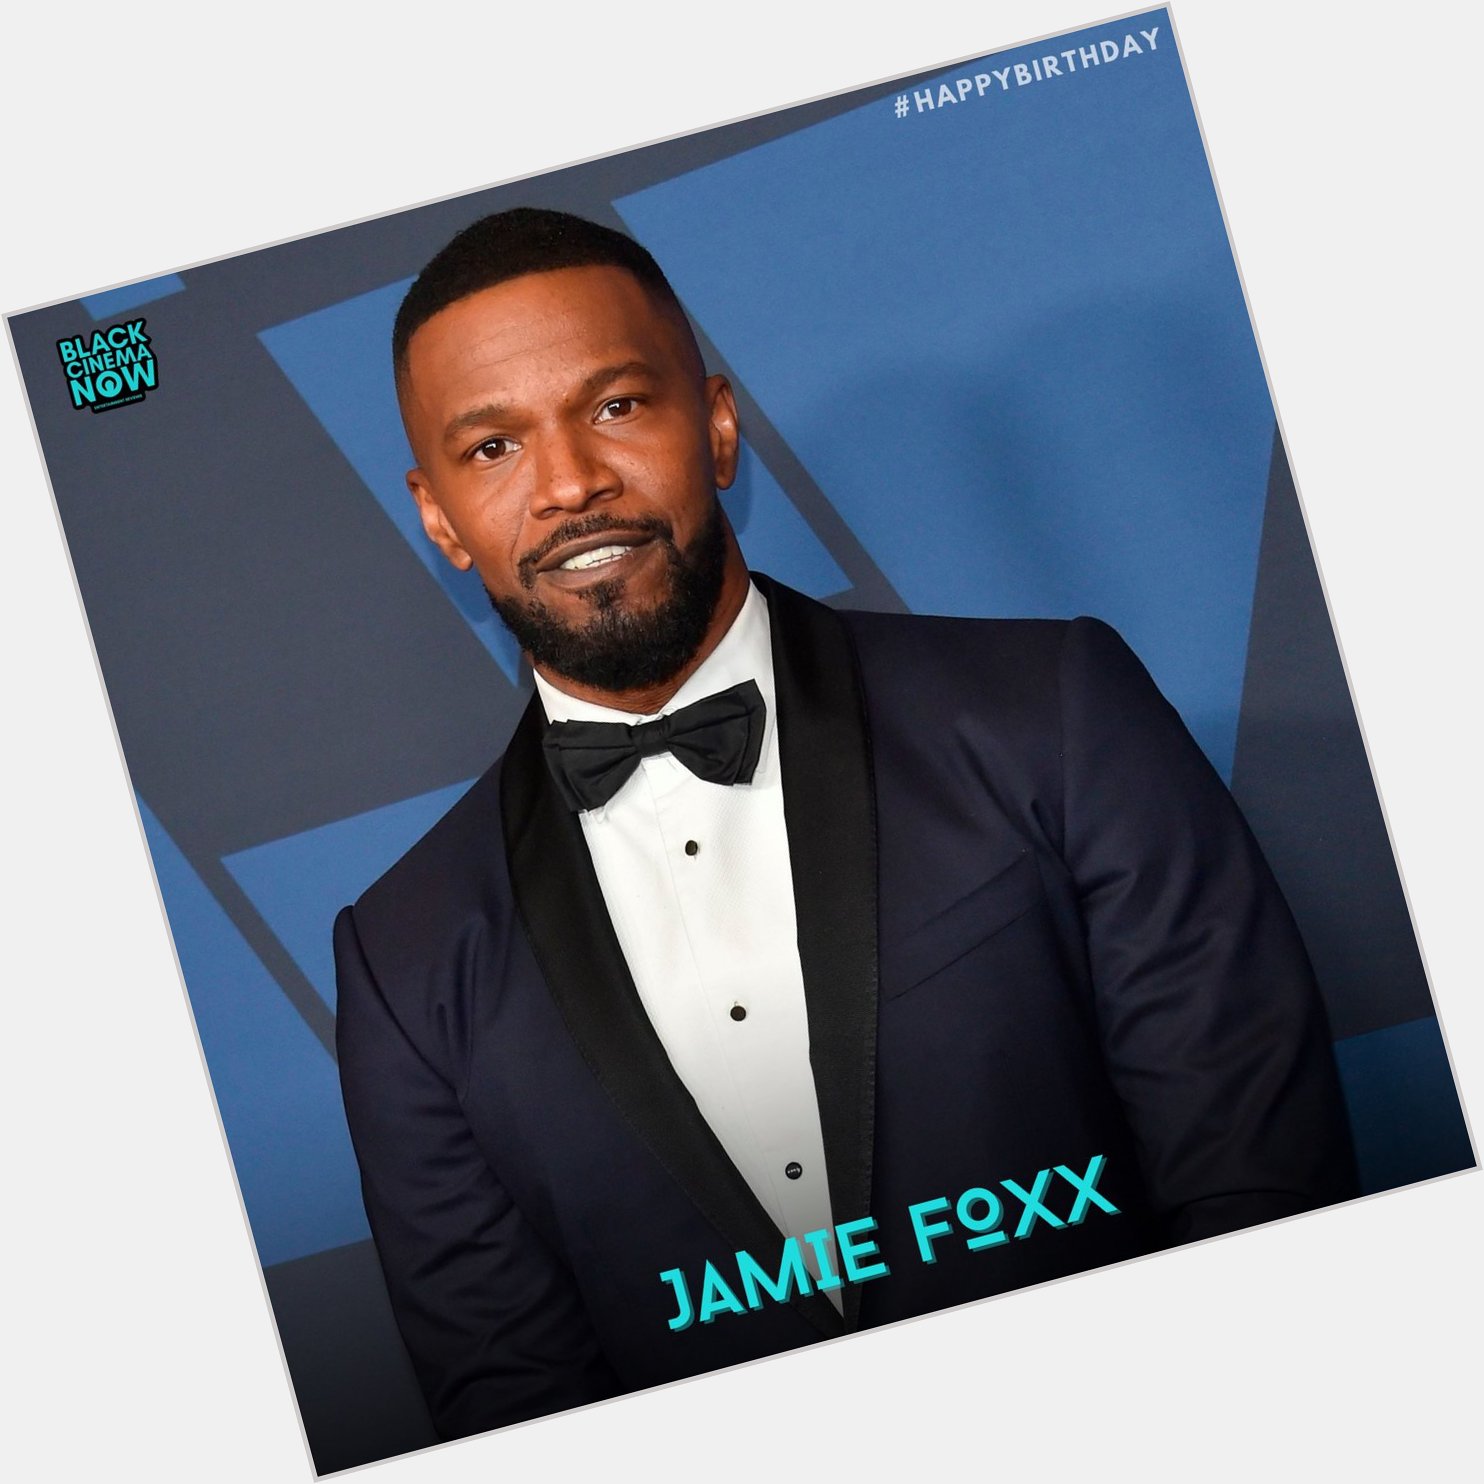 Happy Birthday to the incomparable Jamie Foxx! 